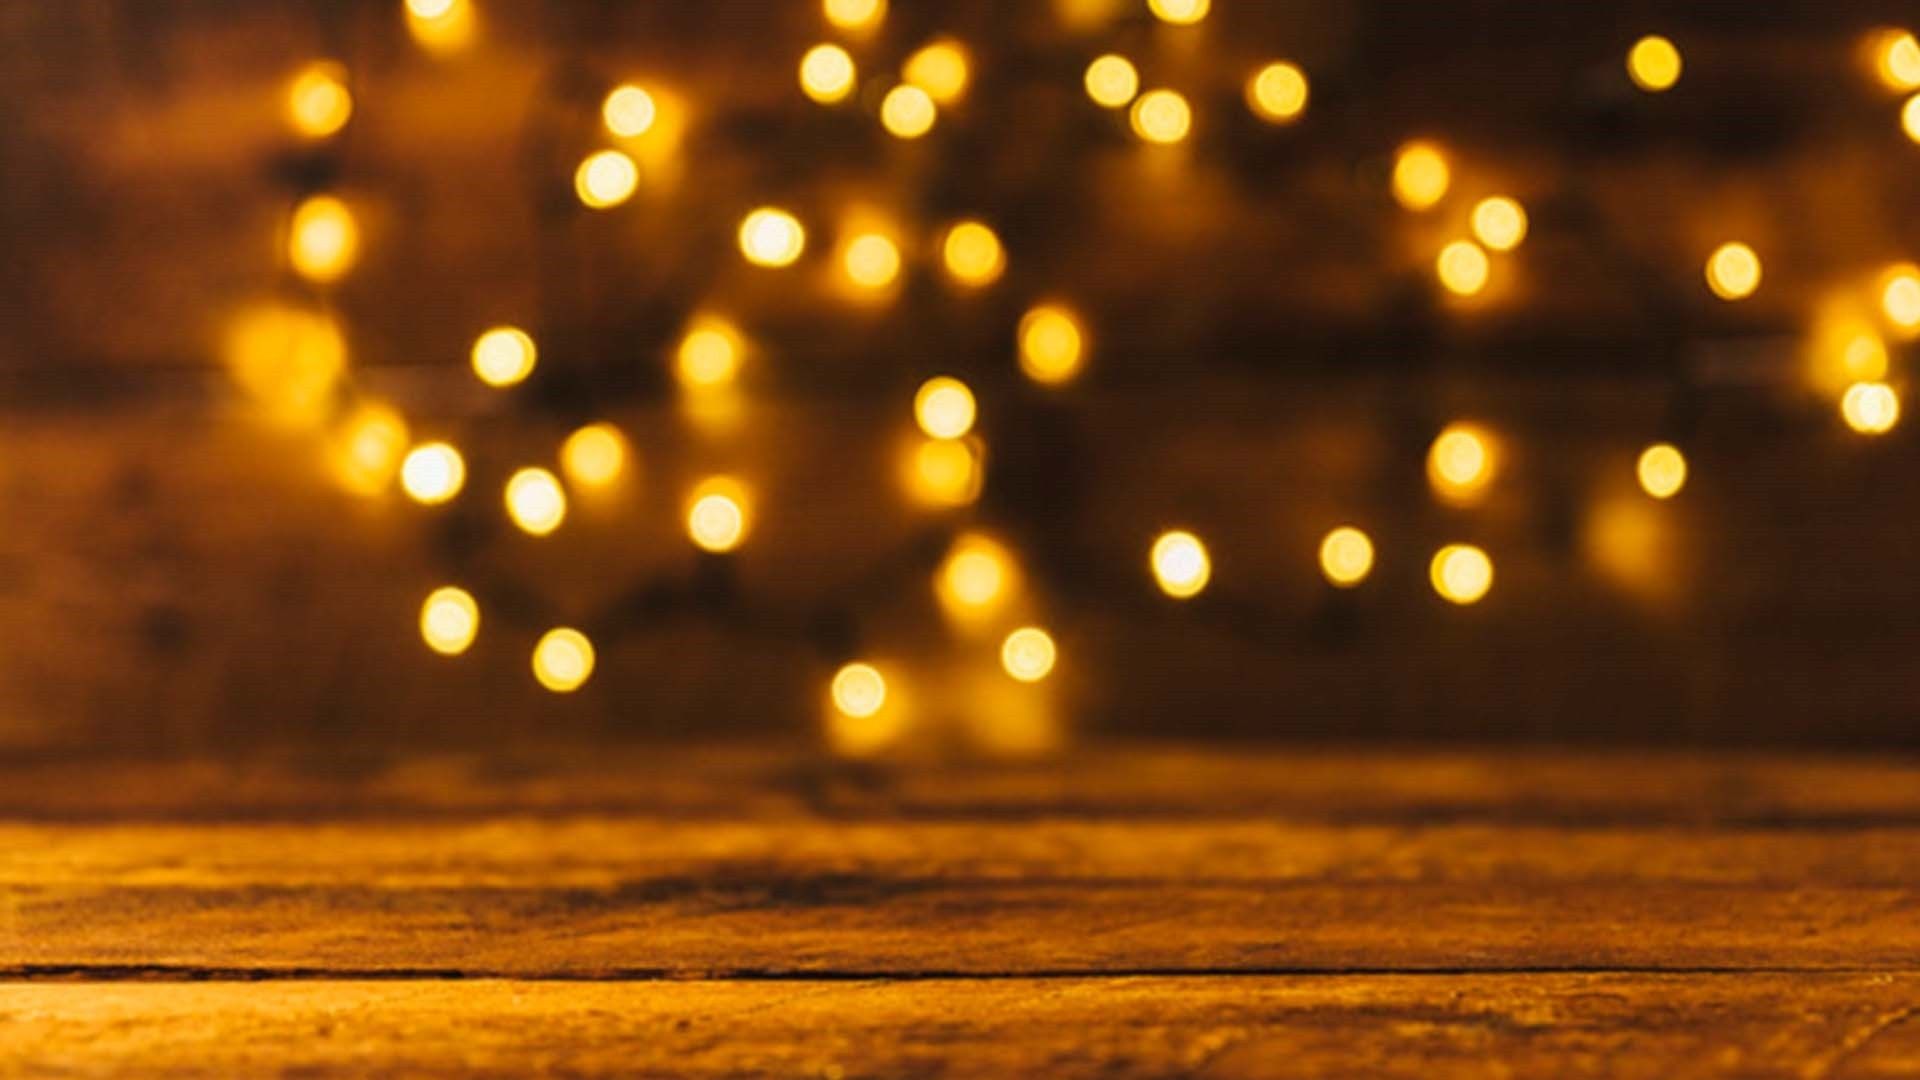 A wooden table with a blurred background of fairy lights. - Fairy lights